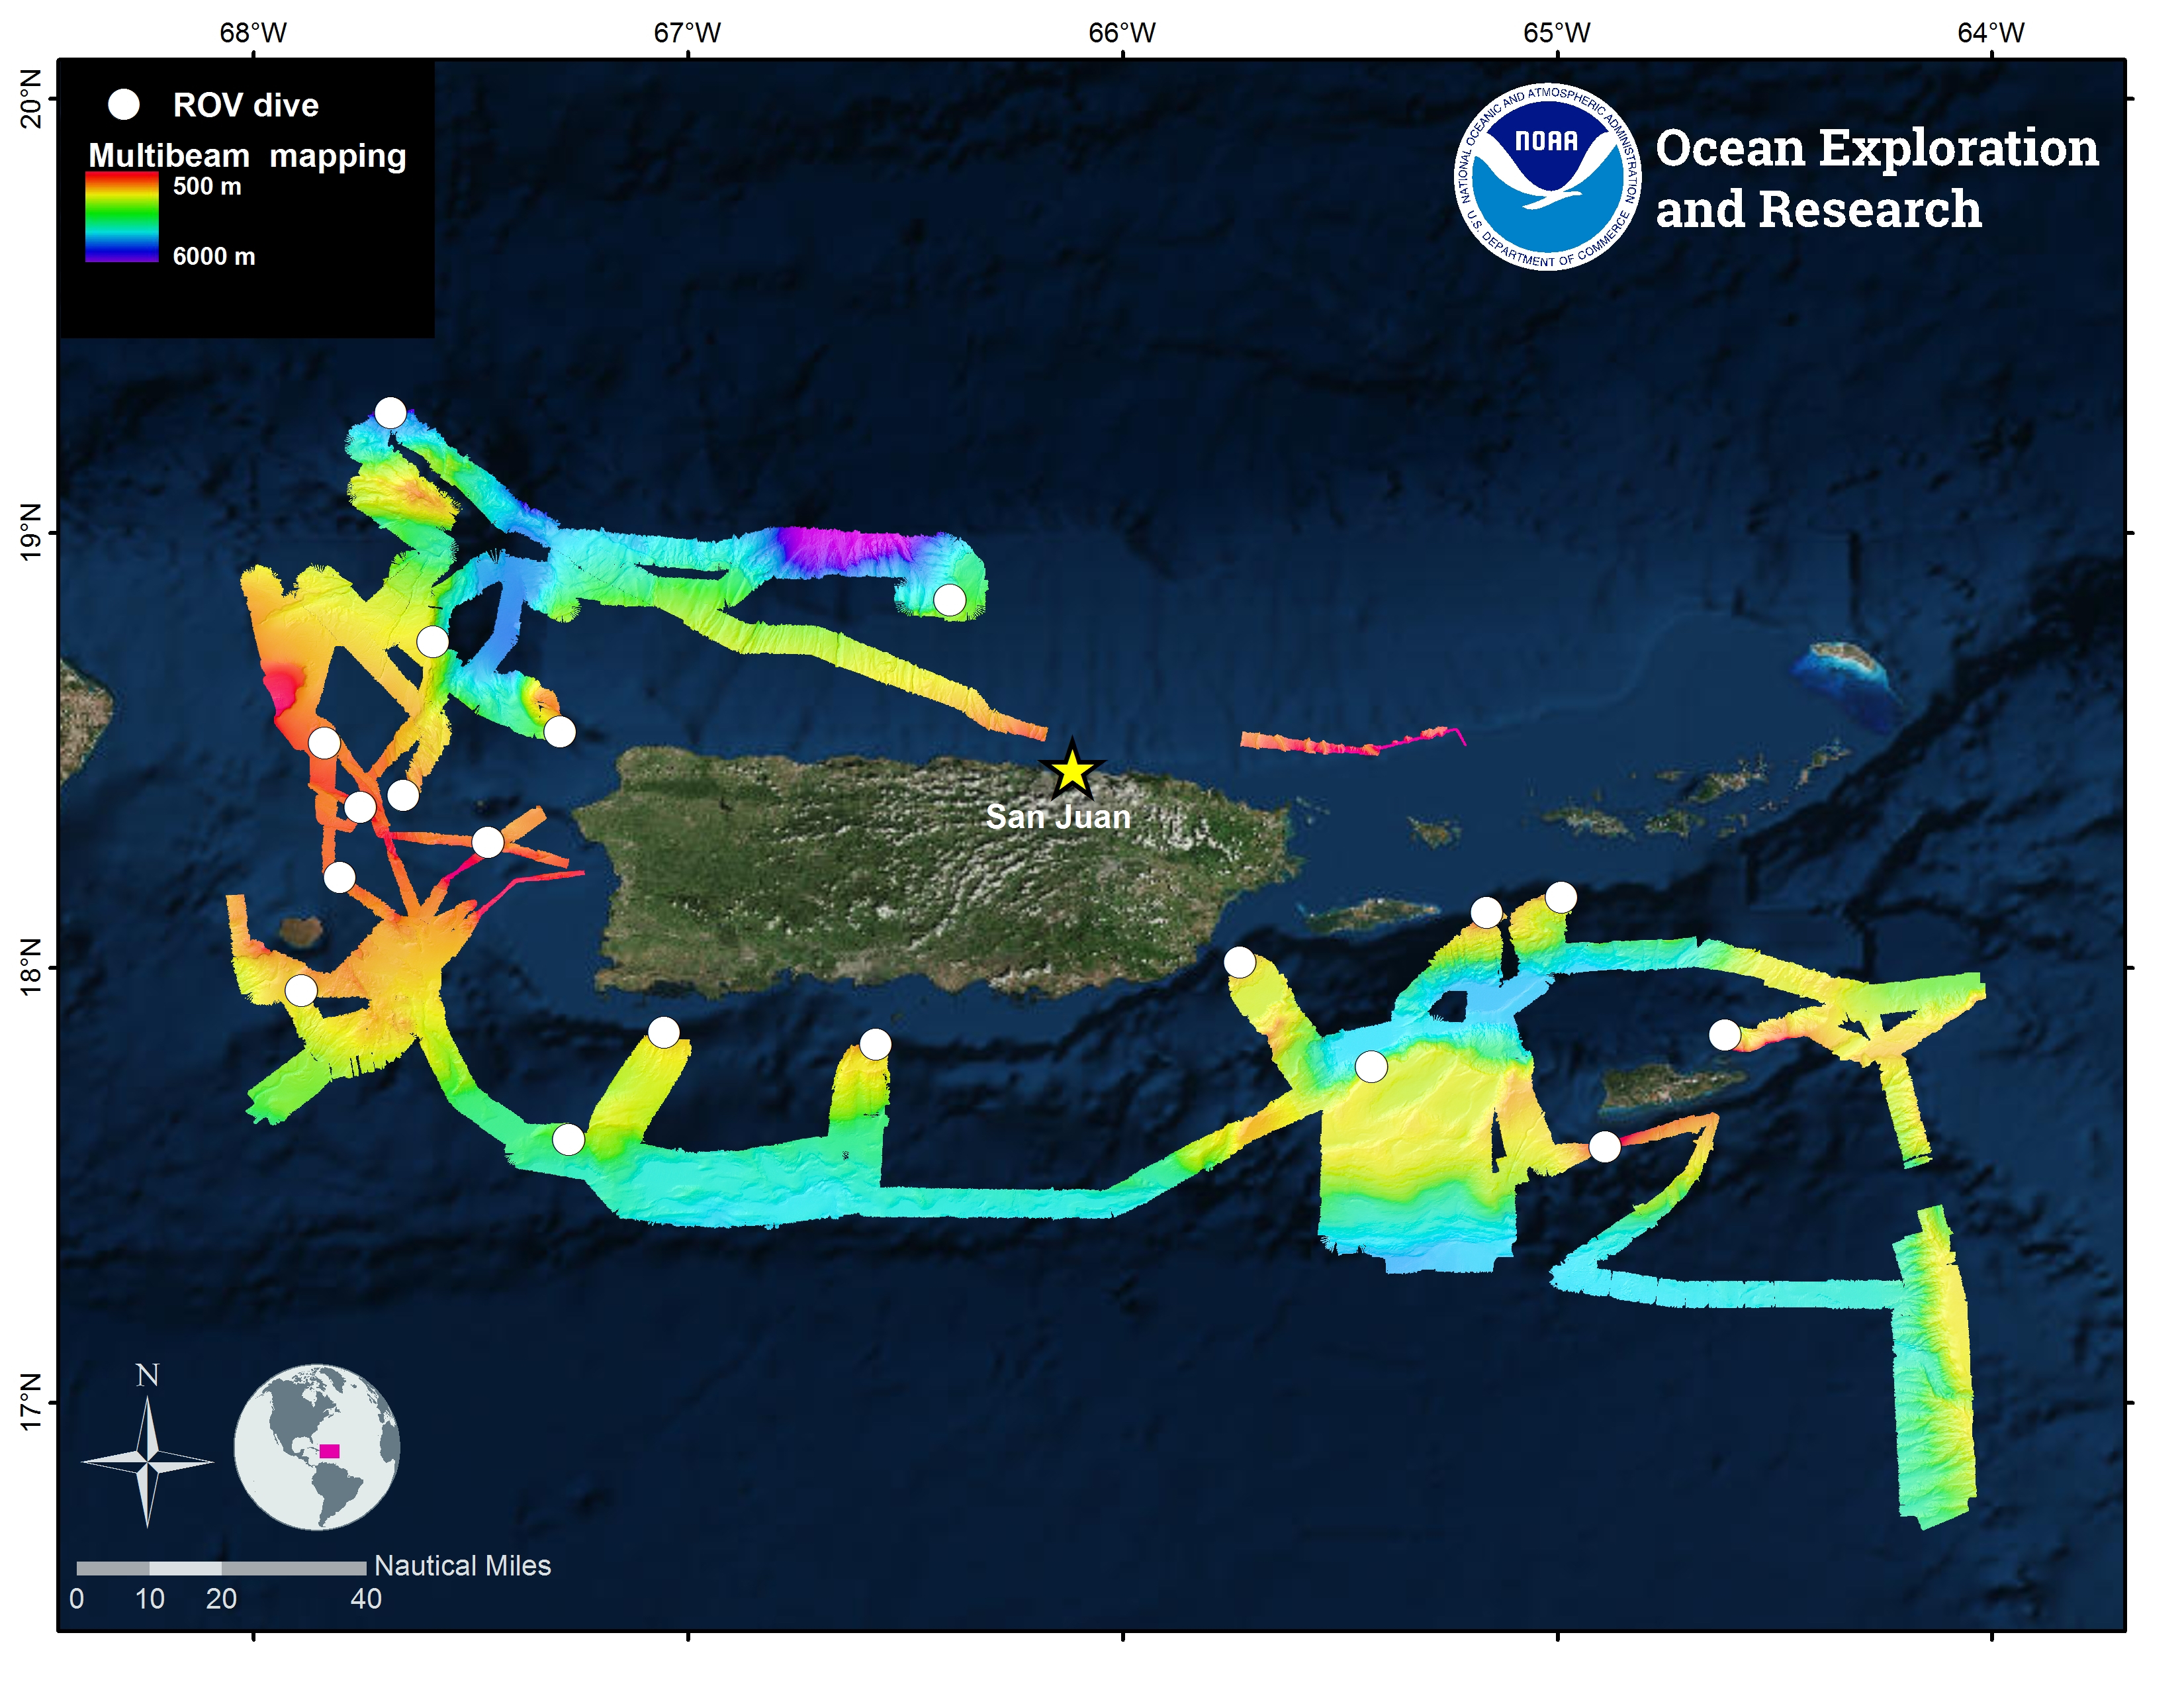 Figure 2. Overview map showing the locations of ROV and mapping operations completed during the Océano Profundo 2018 expedition.